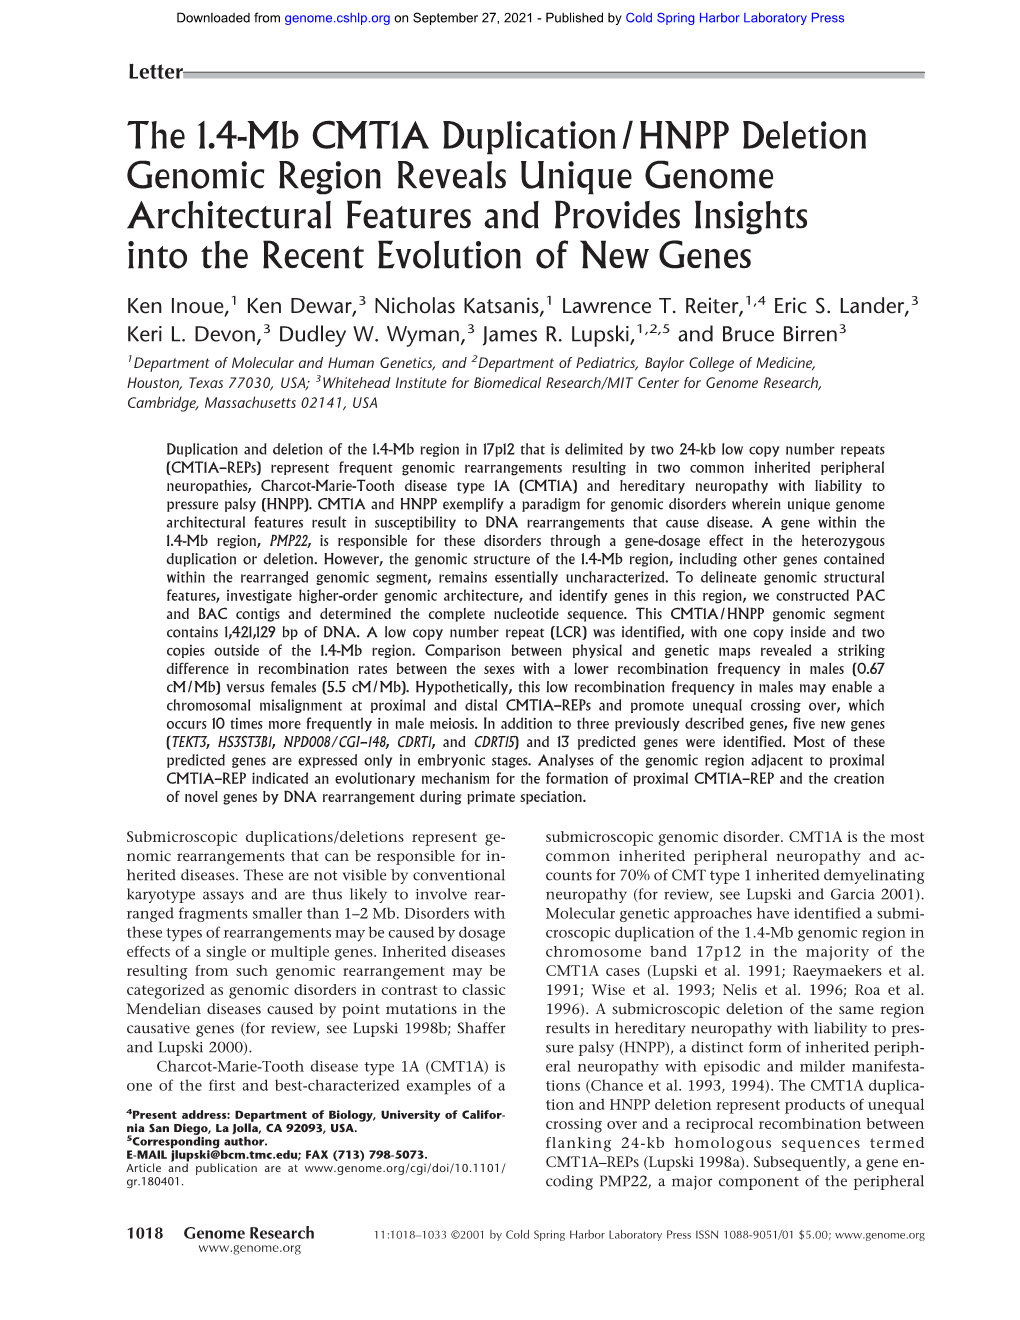 The 1.4-Mb CMT1A Duplication/HNPP Deletion Genomic Region Reveals Unique Genome Architectural Features and Provides Insights Into the Recent Evolution of New Genes